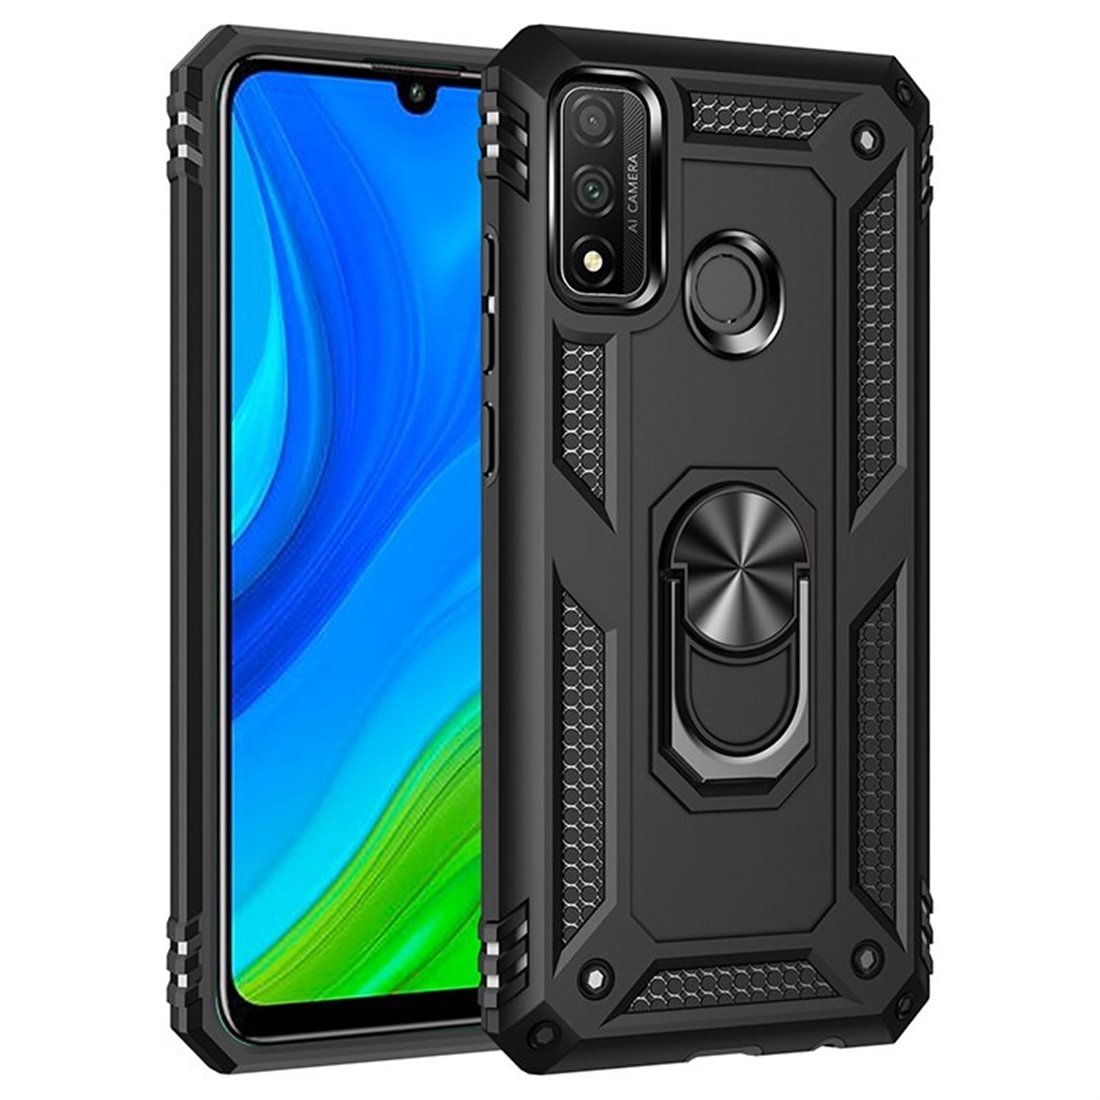 Huawei Huawei P smart 2020 Plastic Black Back Cover - Solid ring